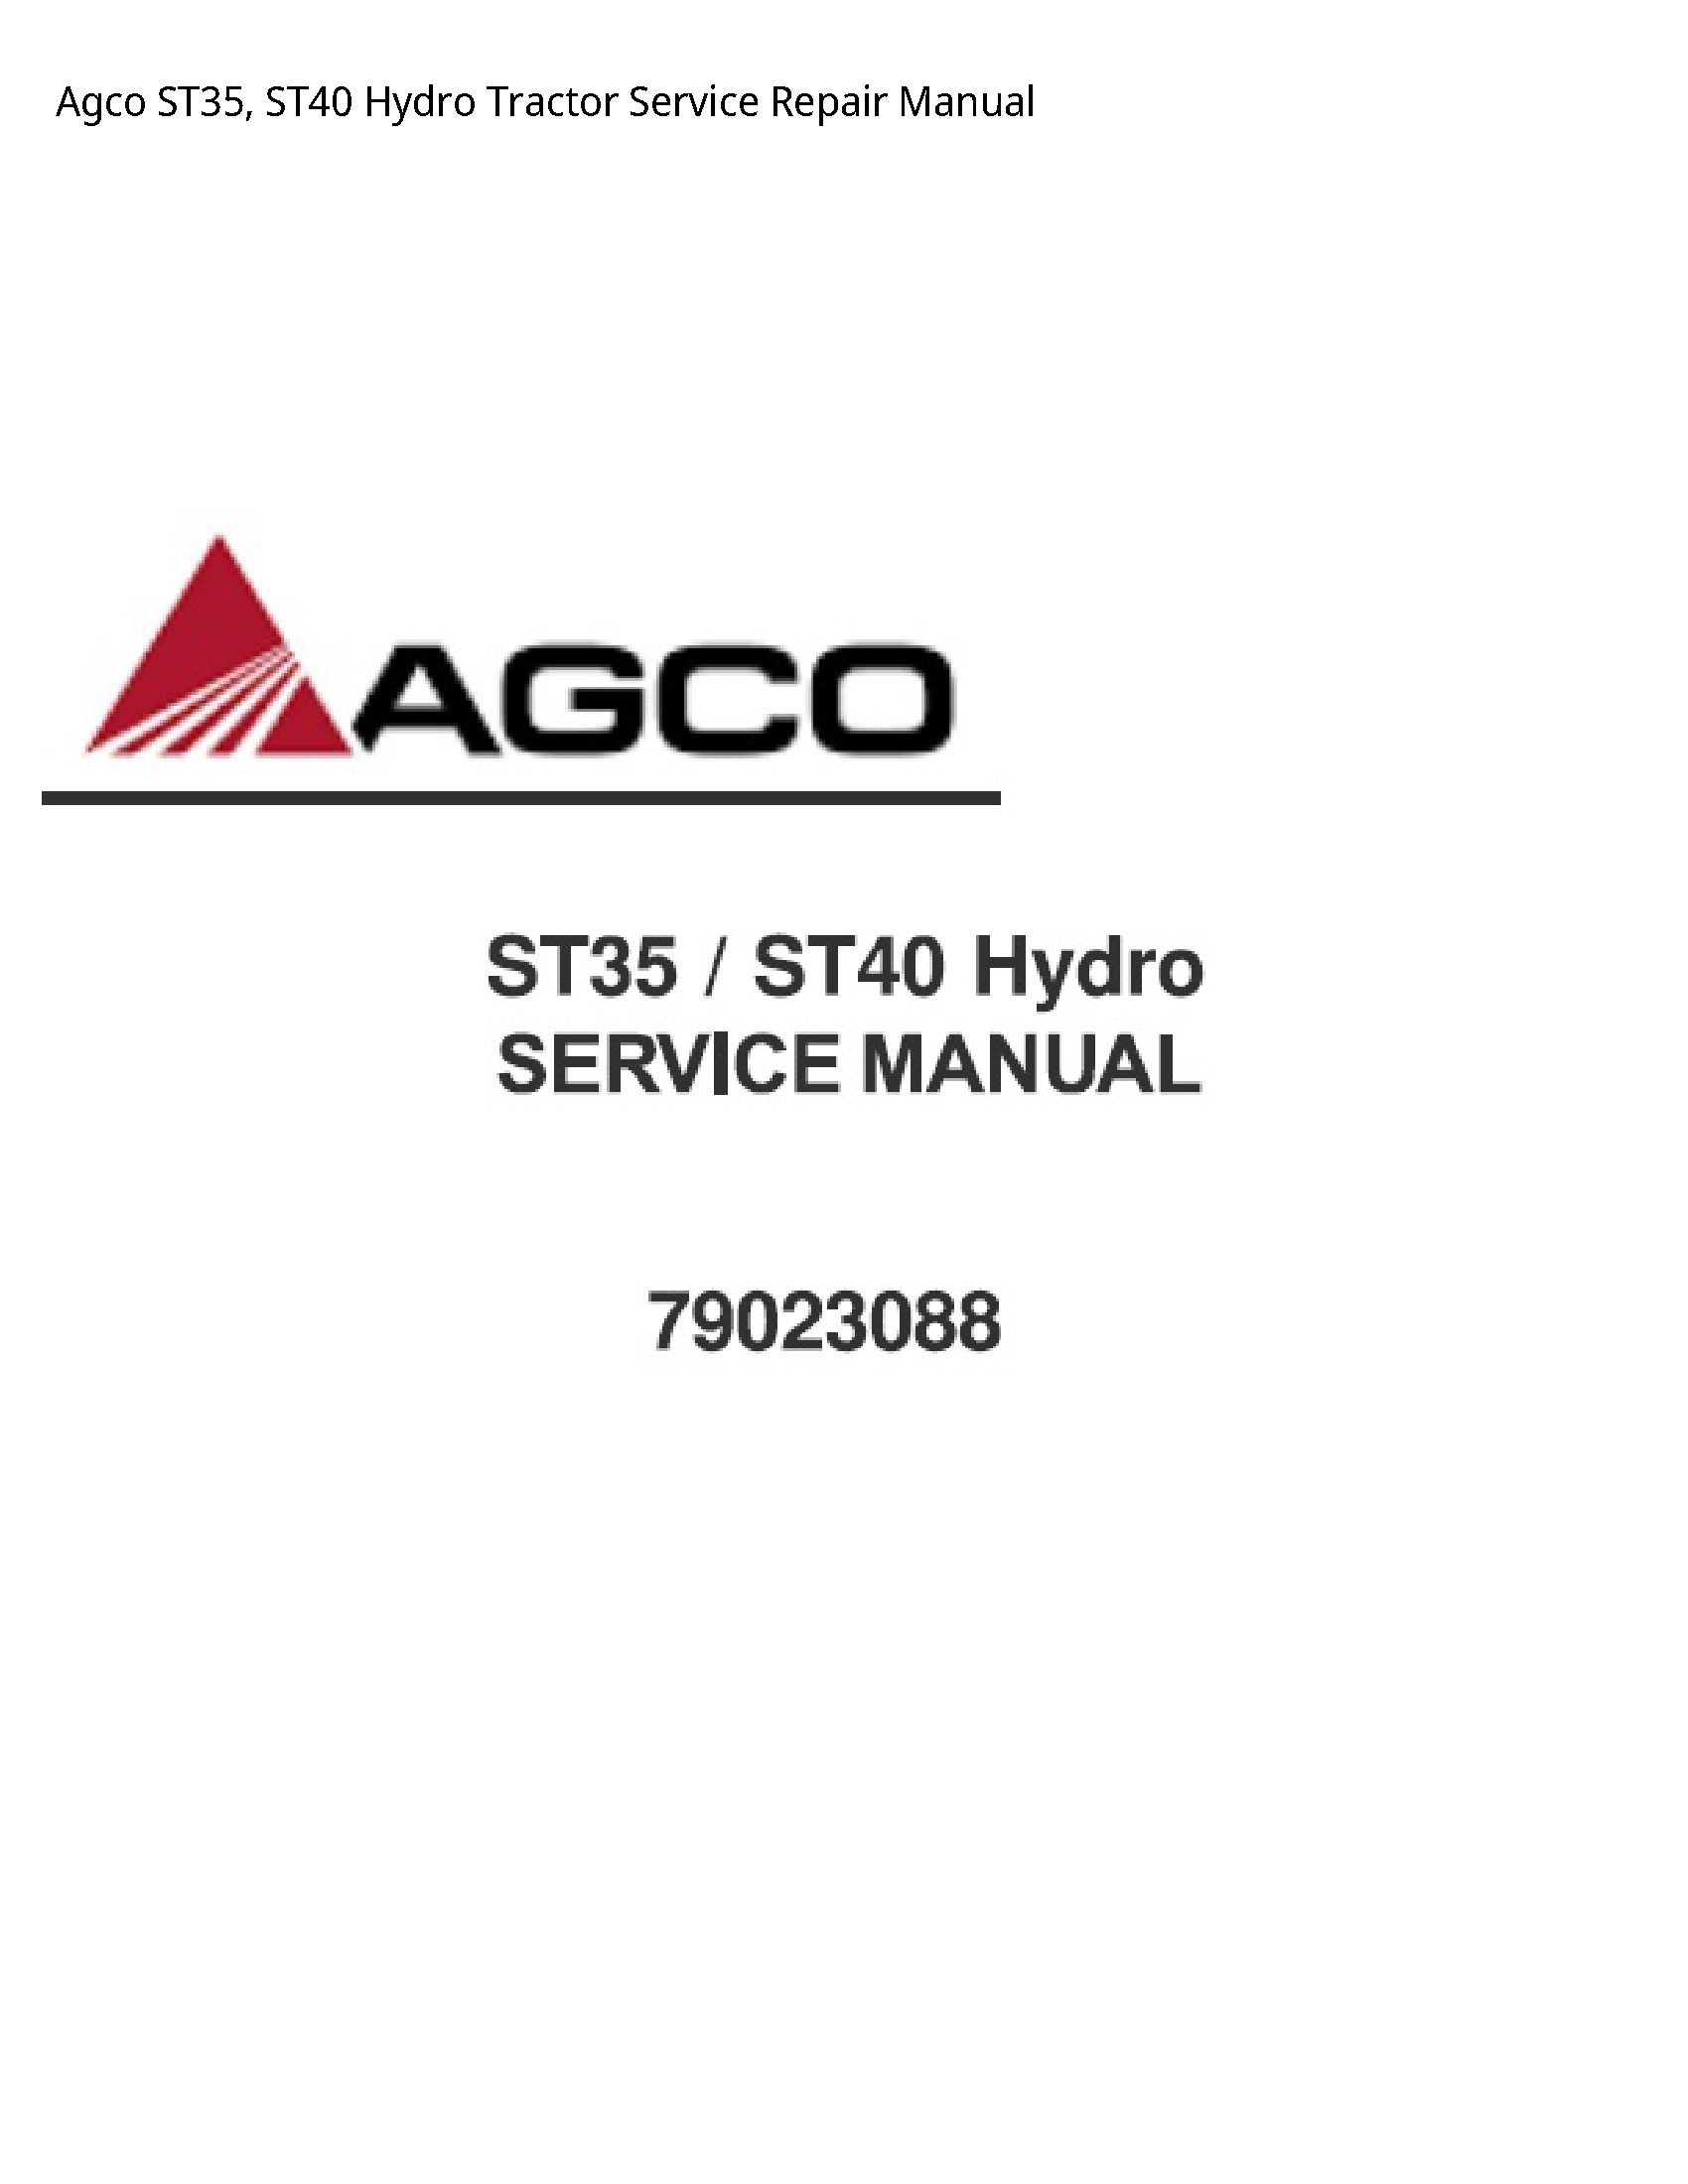 AGCO ST35 Hydro Tractor manual